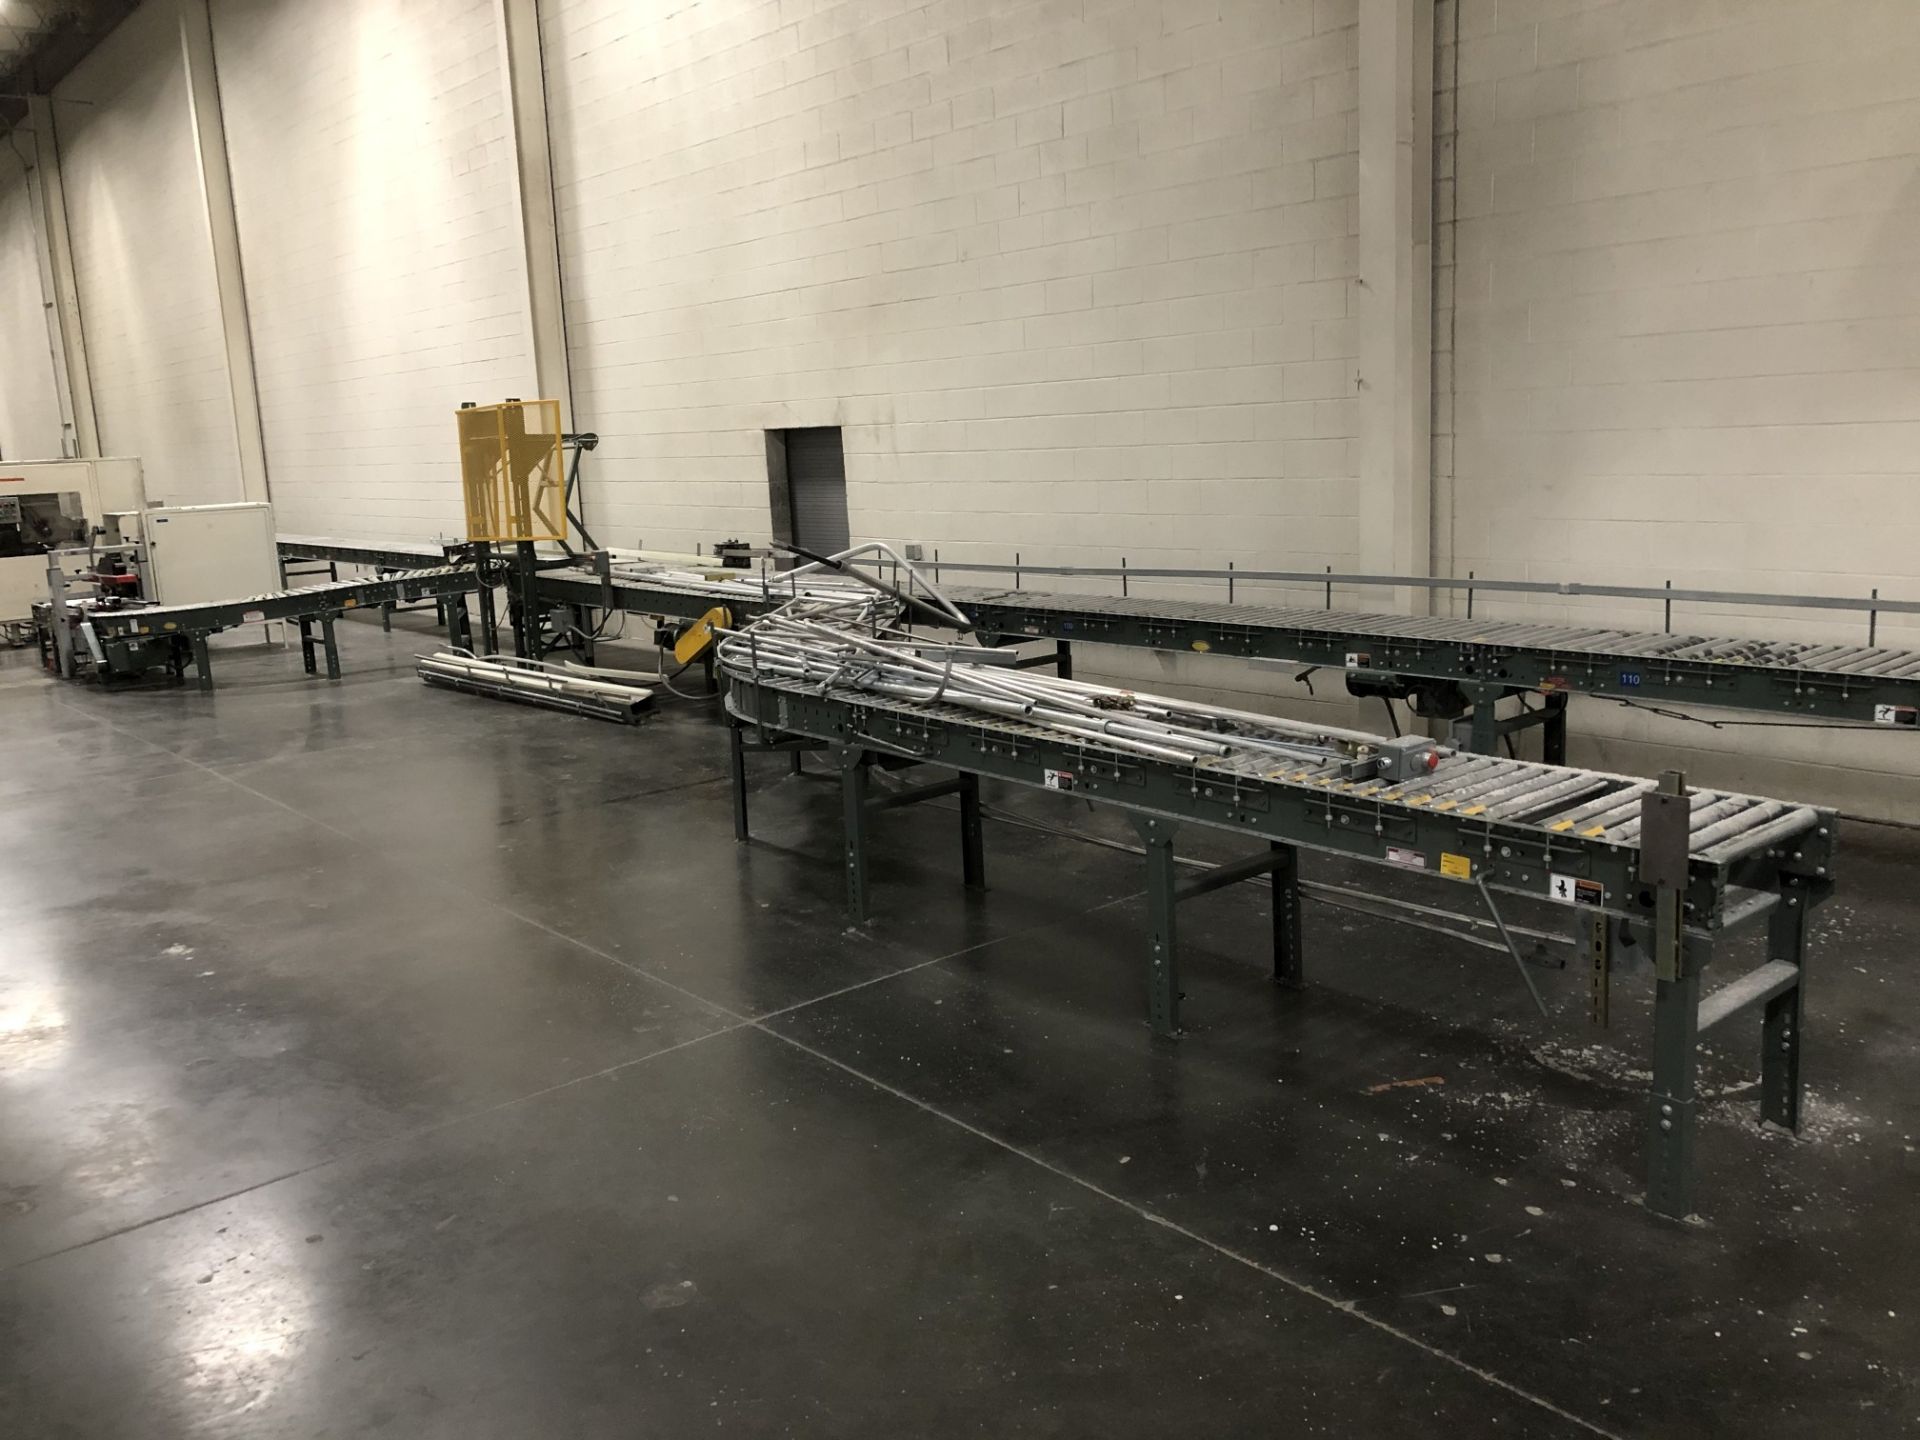 All Hytrol Conveyor Throughout Entire Site, Mostly 20" Wide Powered Roller Conveyor [Please - Image 35 of 80